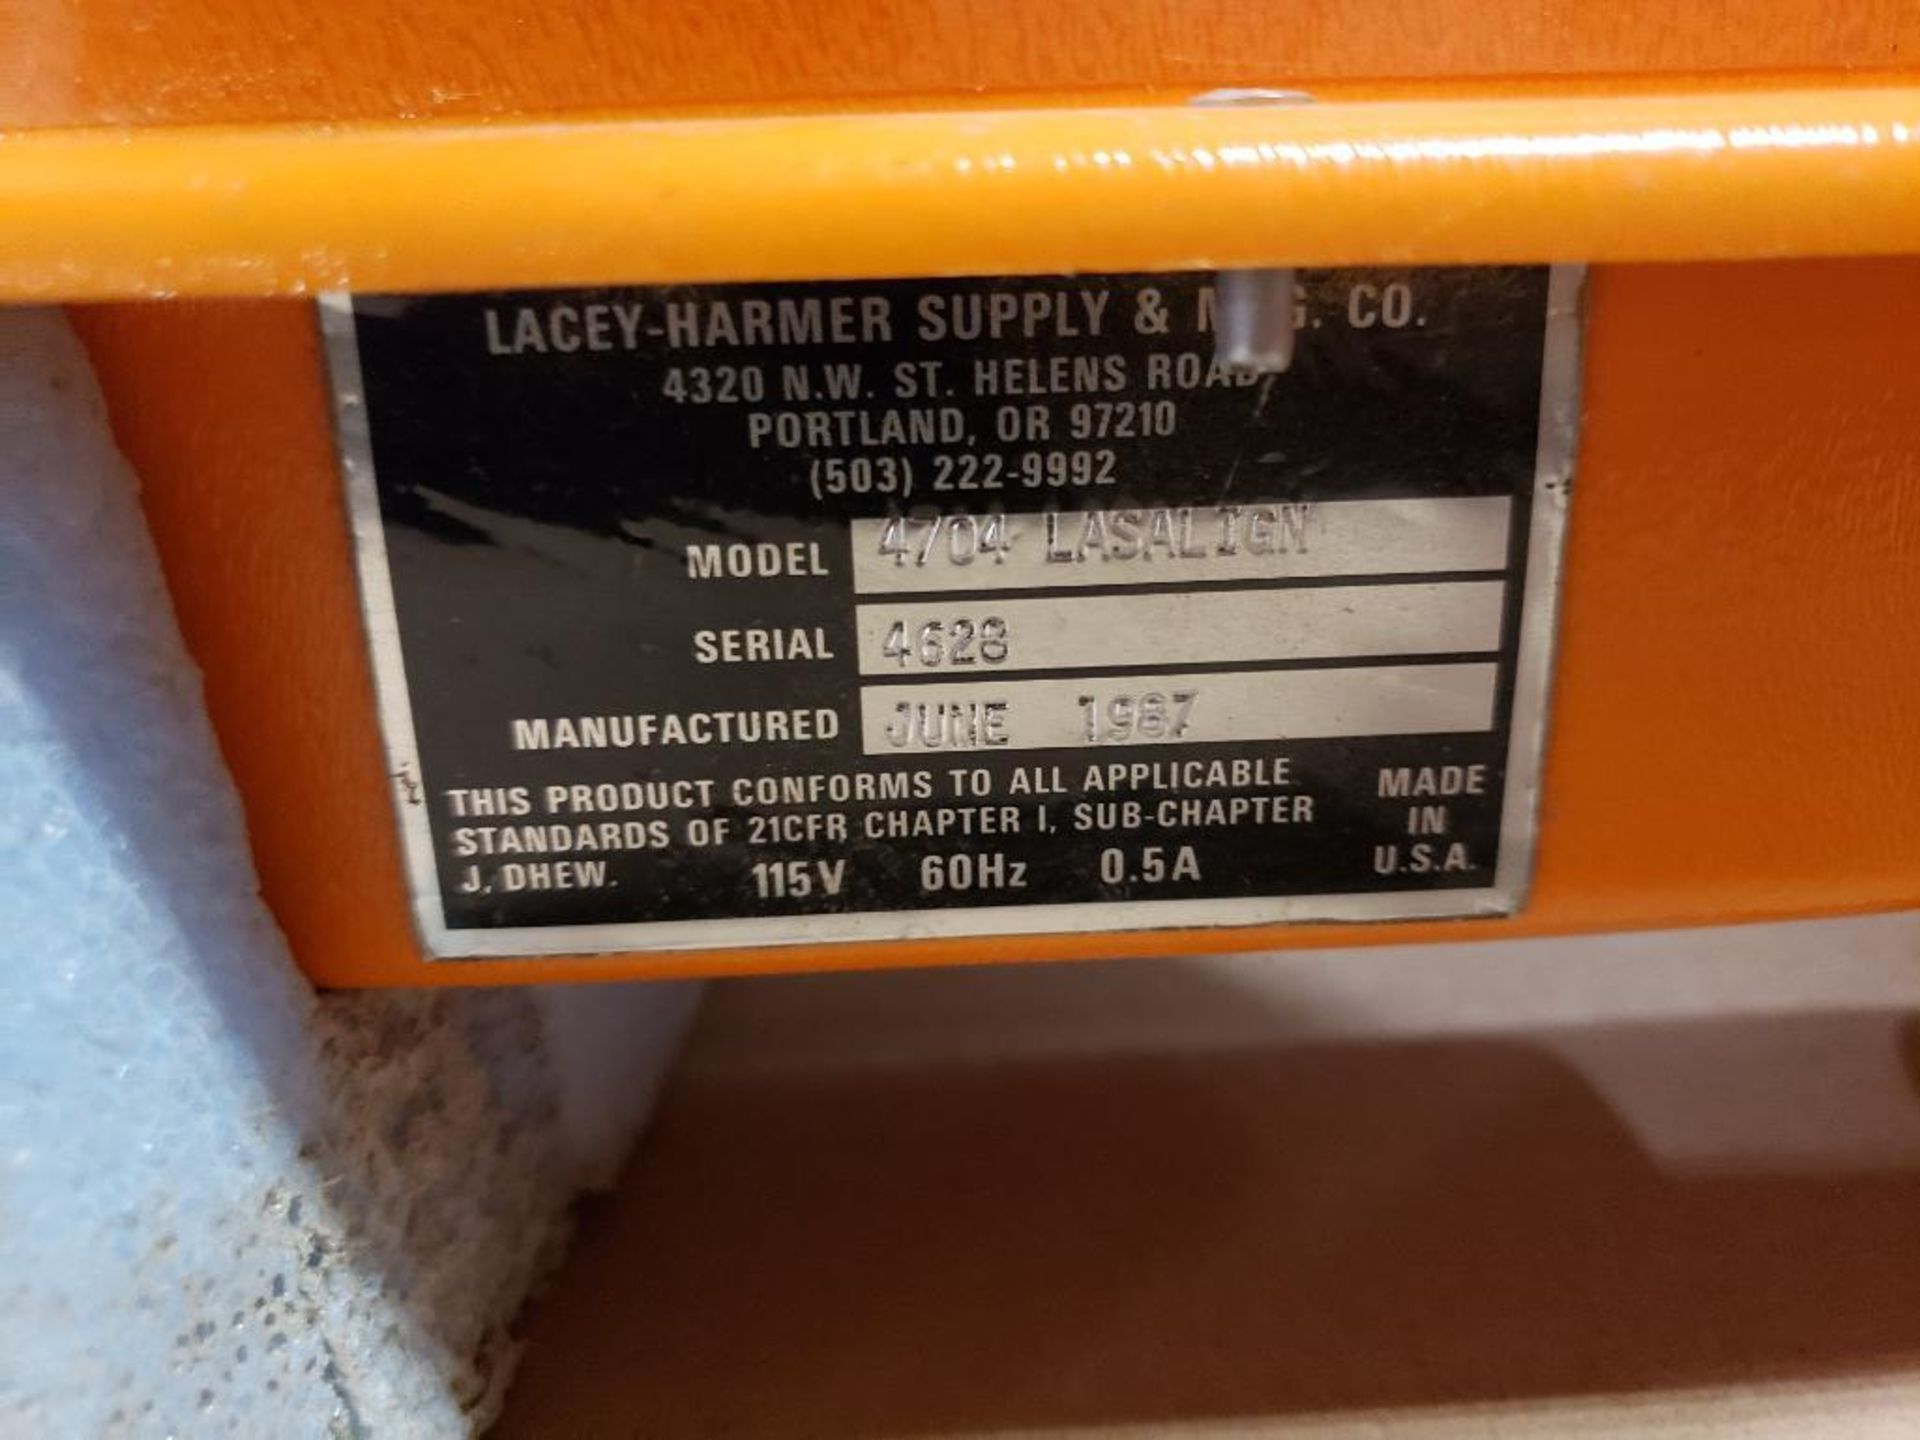 Lacey Harmer Supply Lasalign 4704. - Image 4 of 6